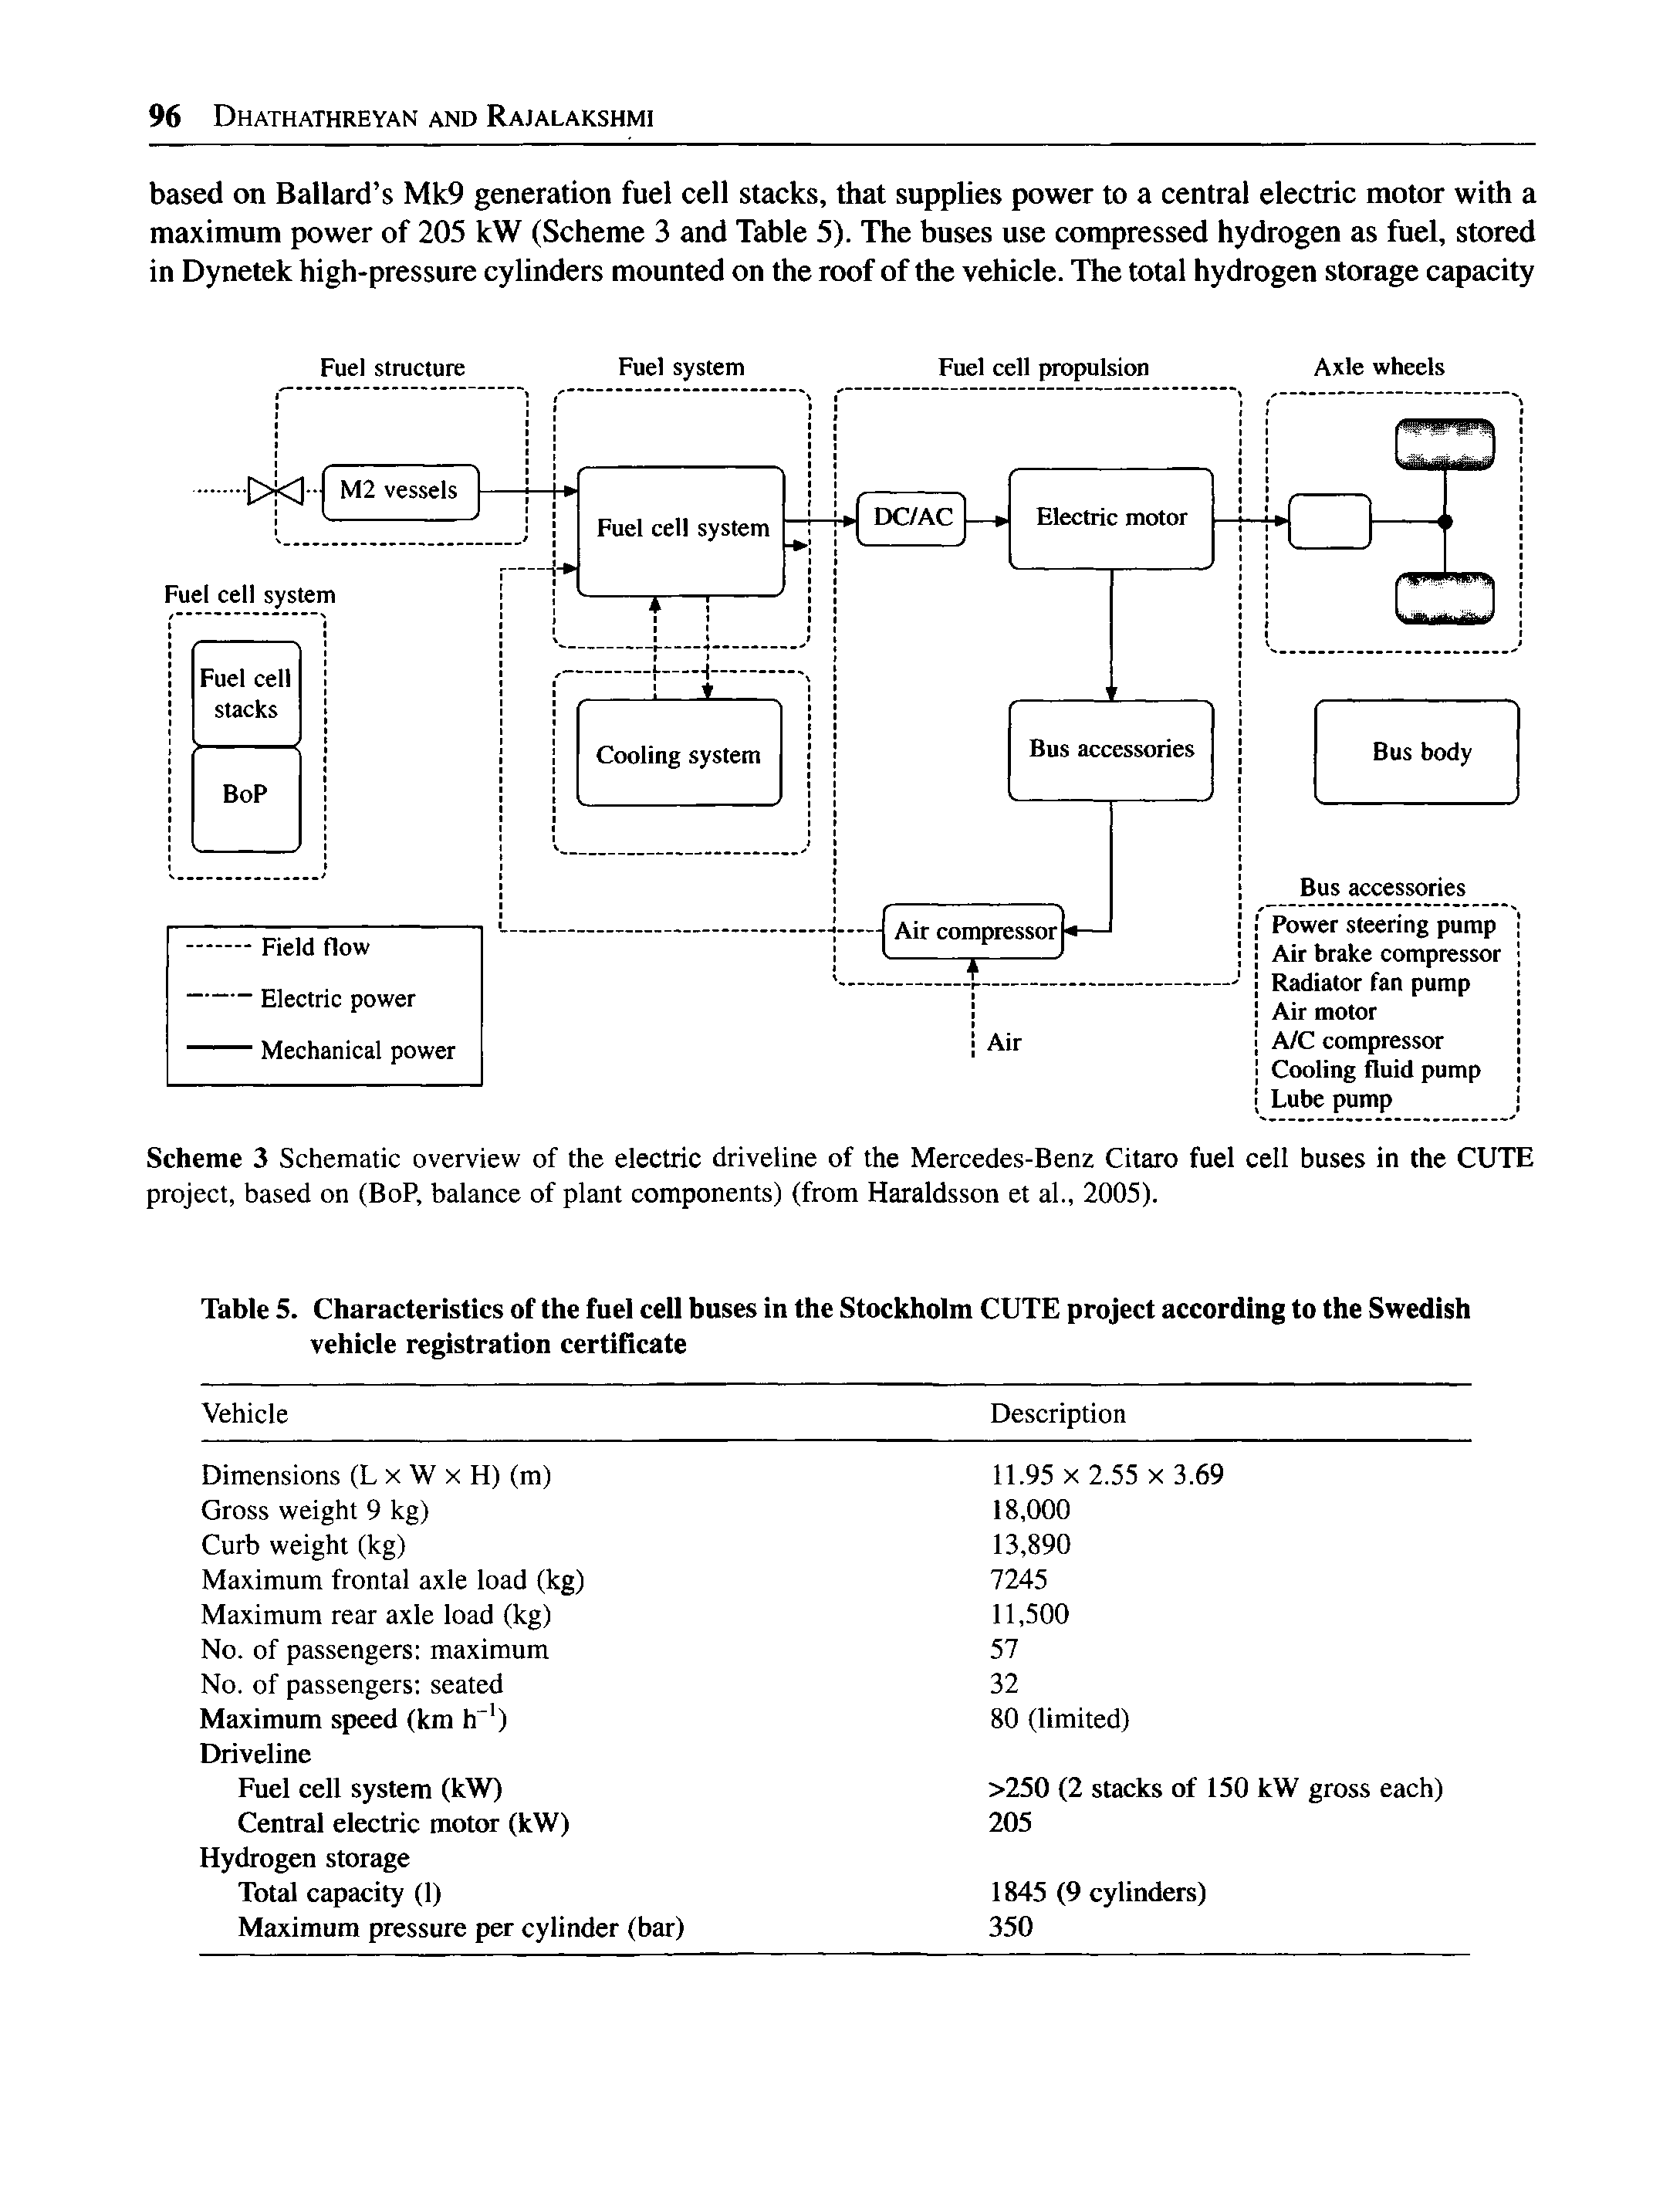 Scheme 3 Schematic overview of the electric driveline of the Mercedes-Benz Citaro fuel cell buses in the CUTE project, based on (BoP, balance of plant components) (from Haraldsson et al., 2005).